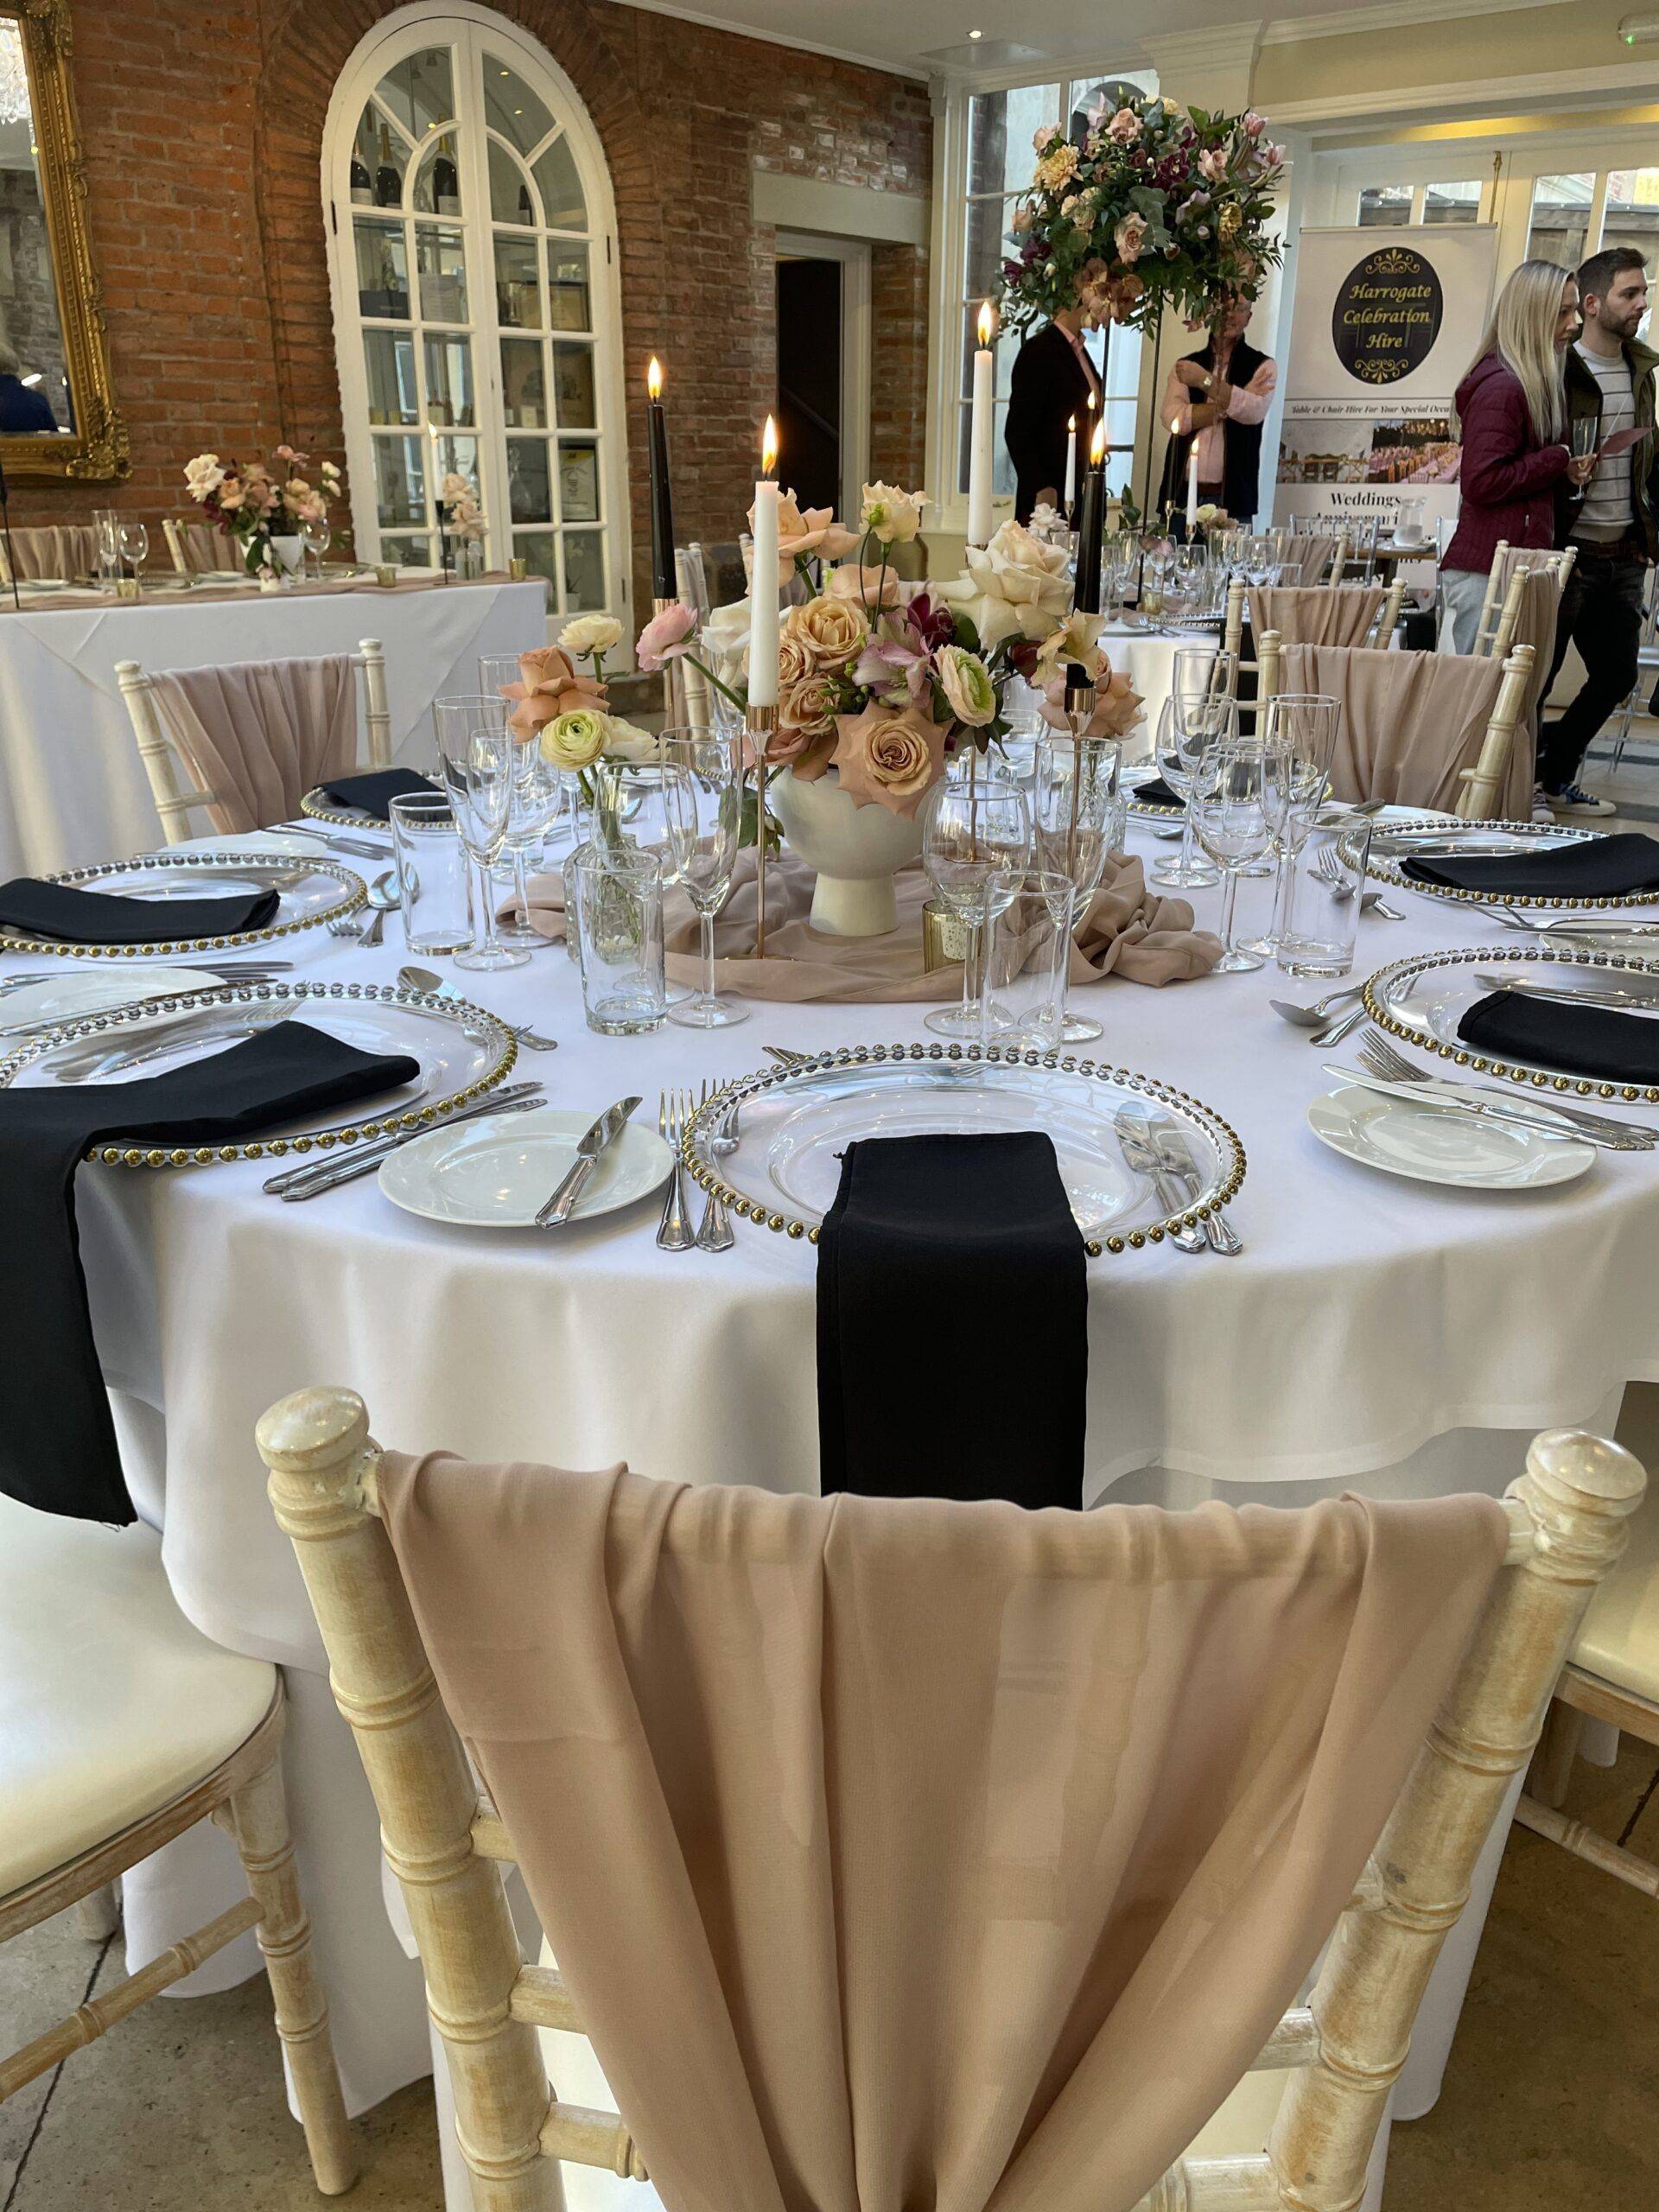 a table set for a formal dinner with black and white linens.